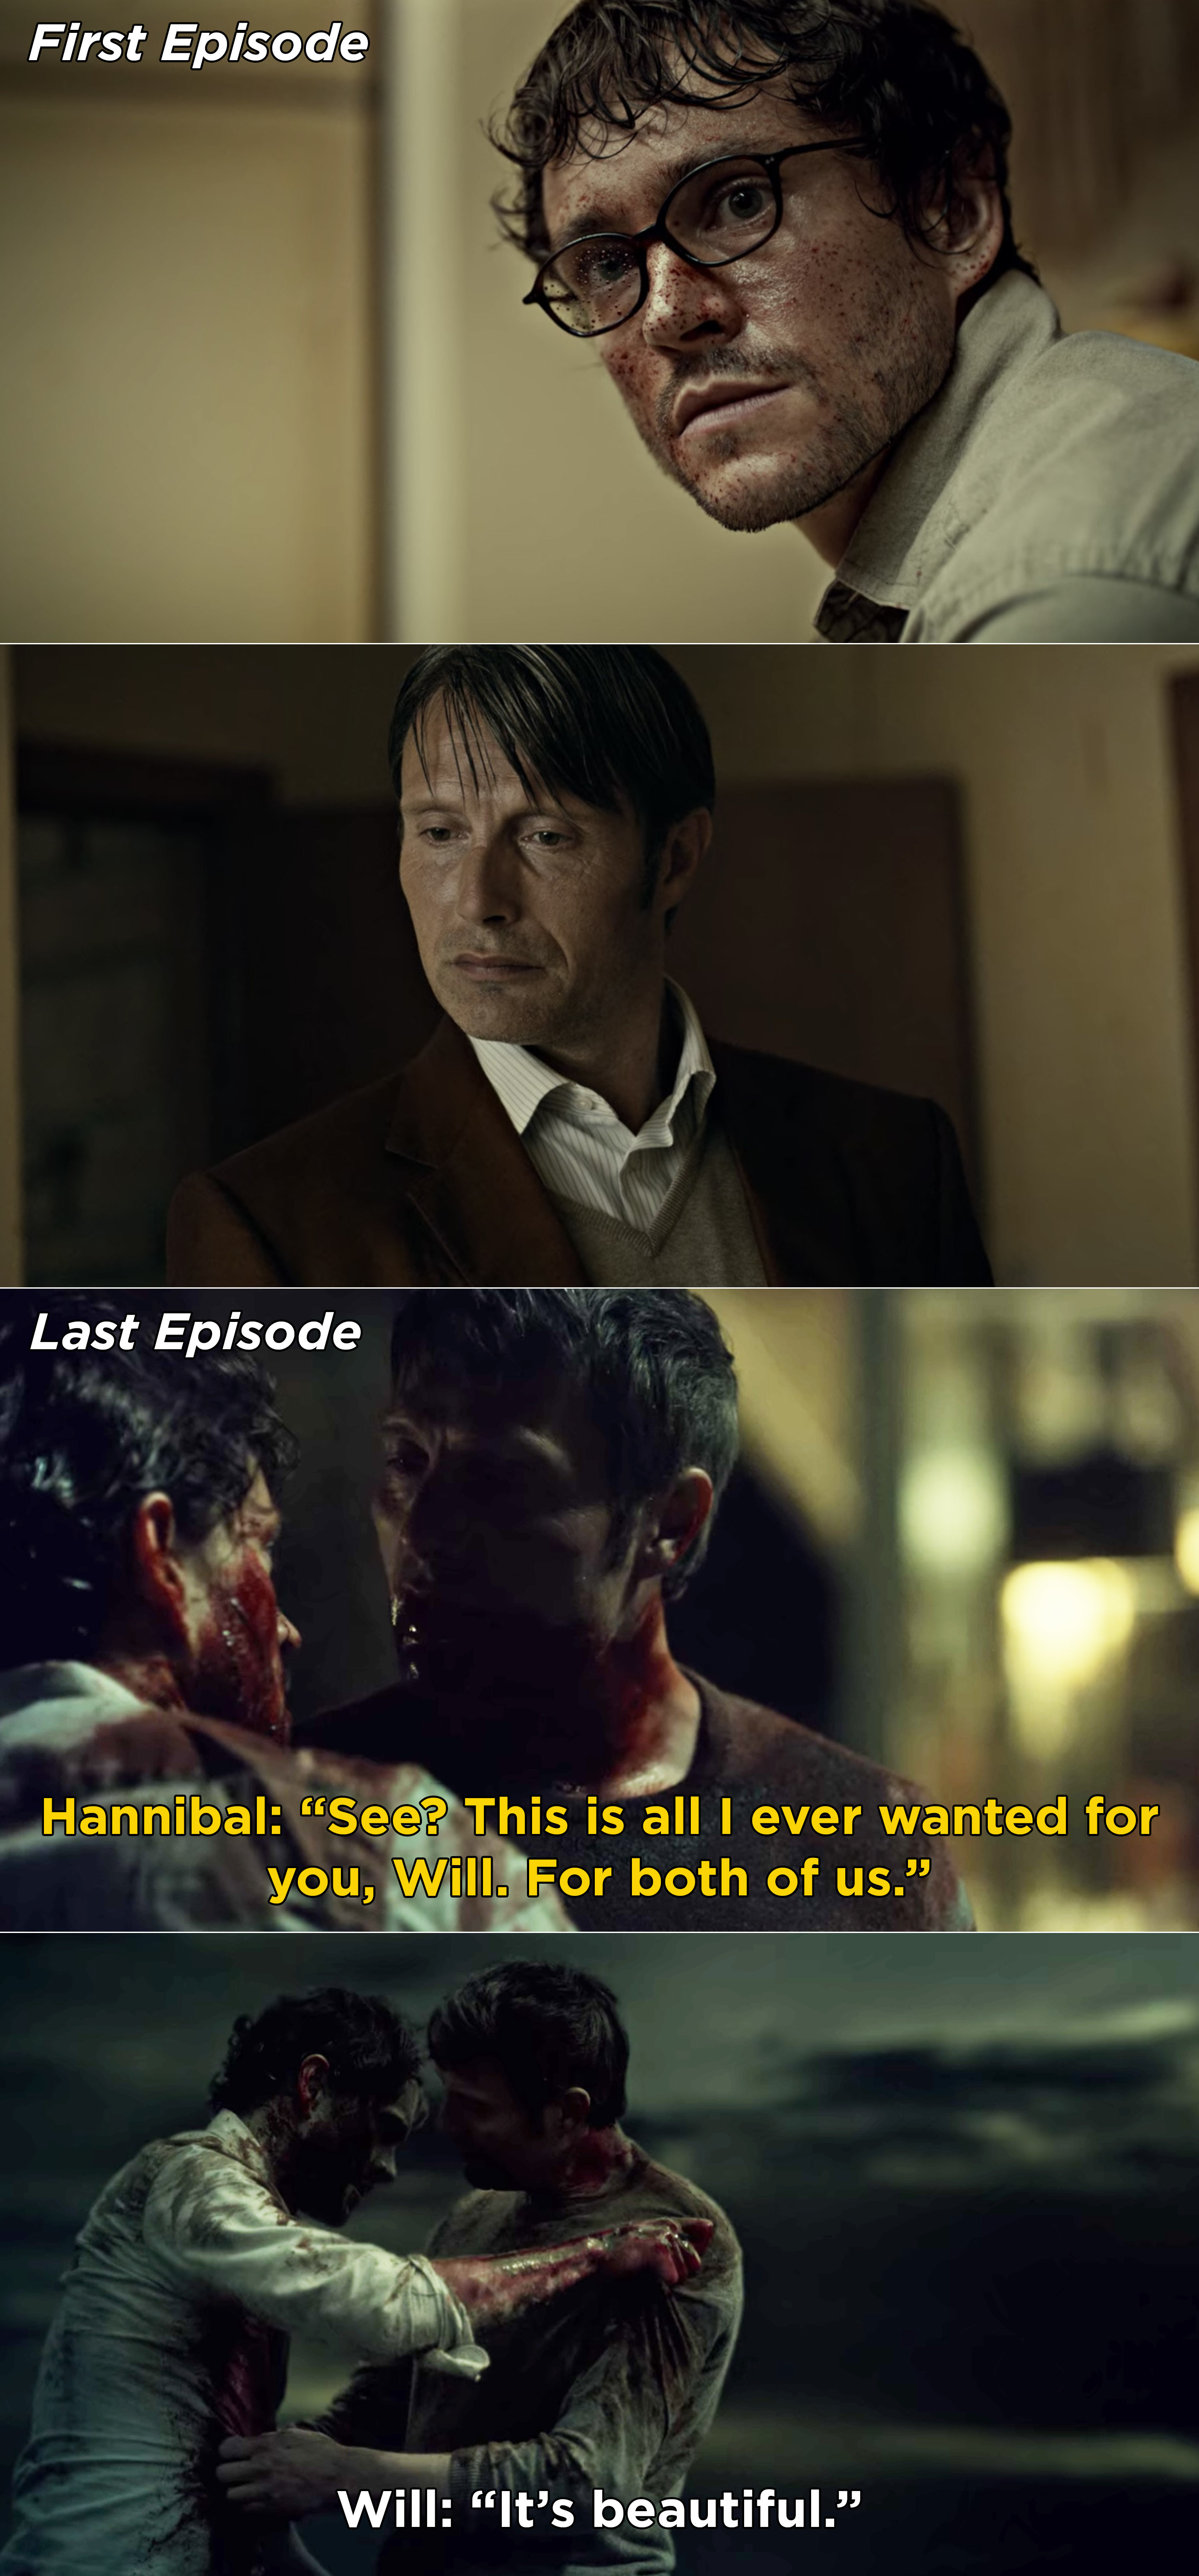 Hannibal and Will, who&#x27;s covered in blood, looking at each other, and then Hannibal saying this is all he ever wanted for Will during the series finale